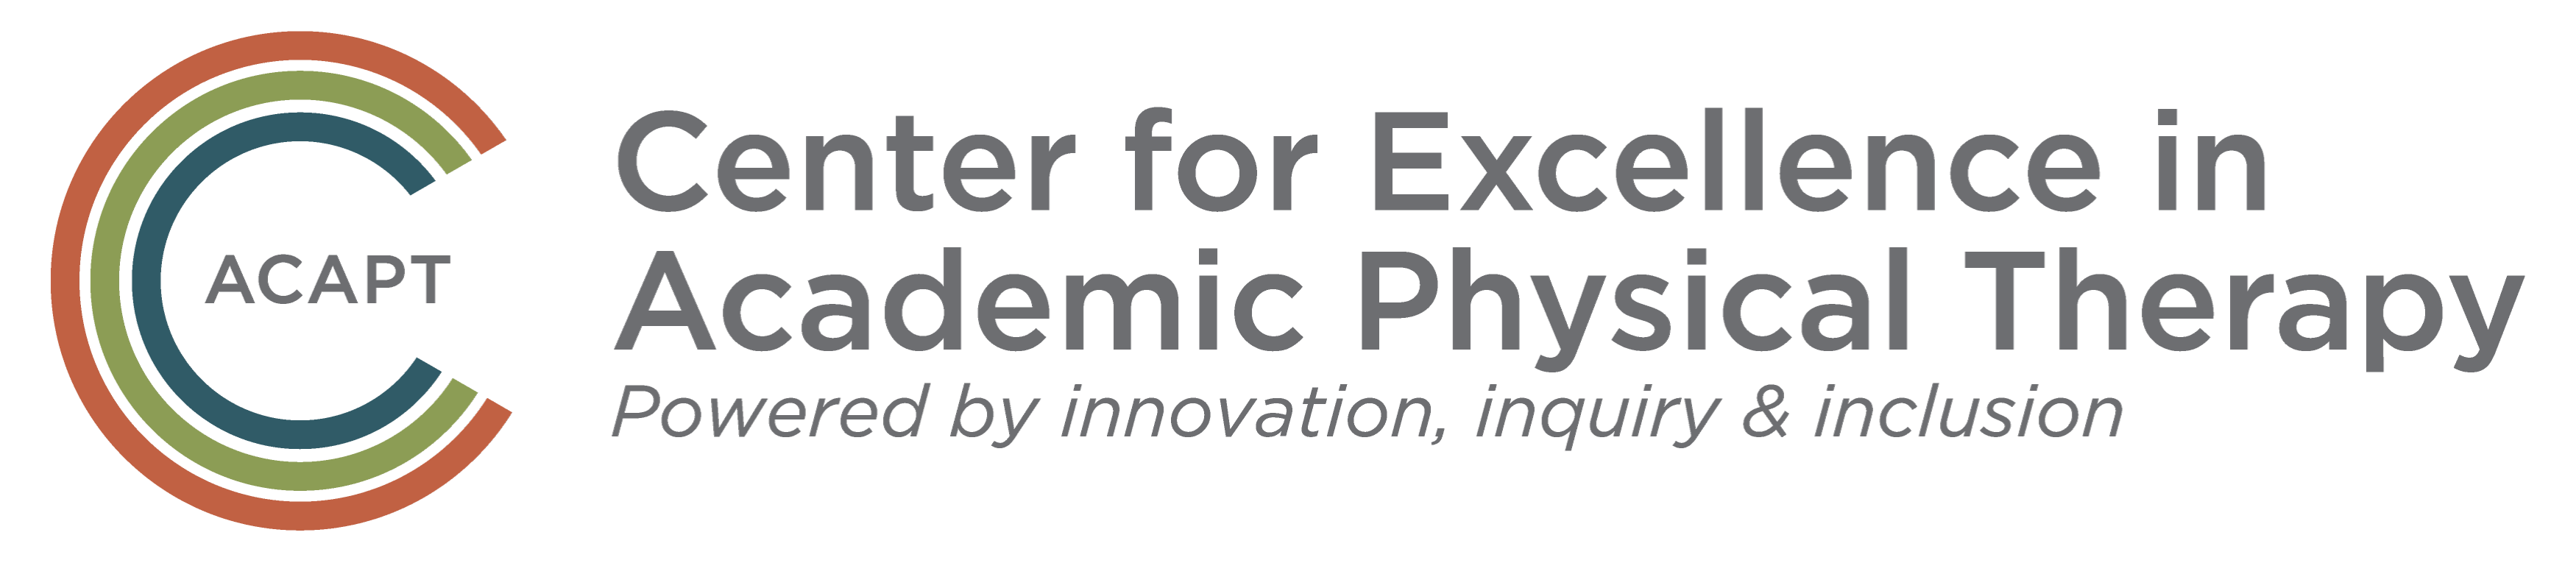 ACAPT Center for Excellence in Academic Physical Therapy HP